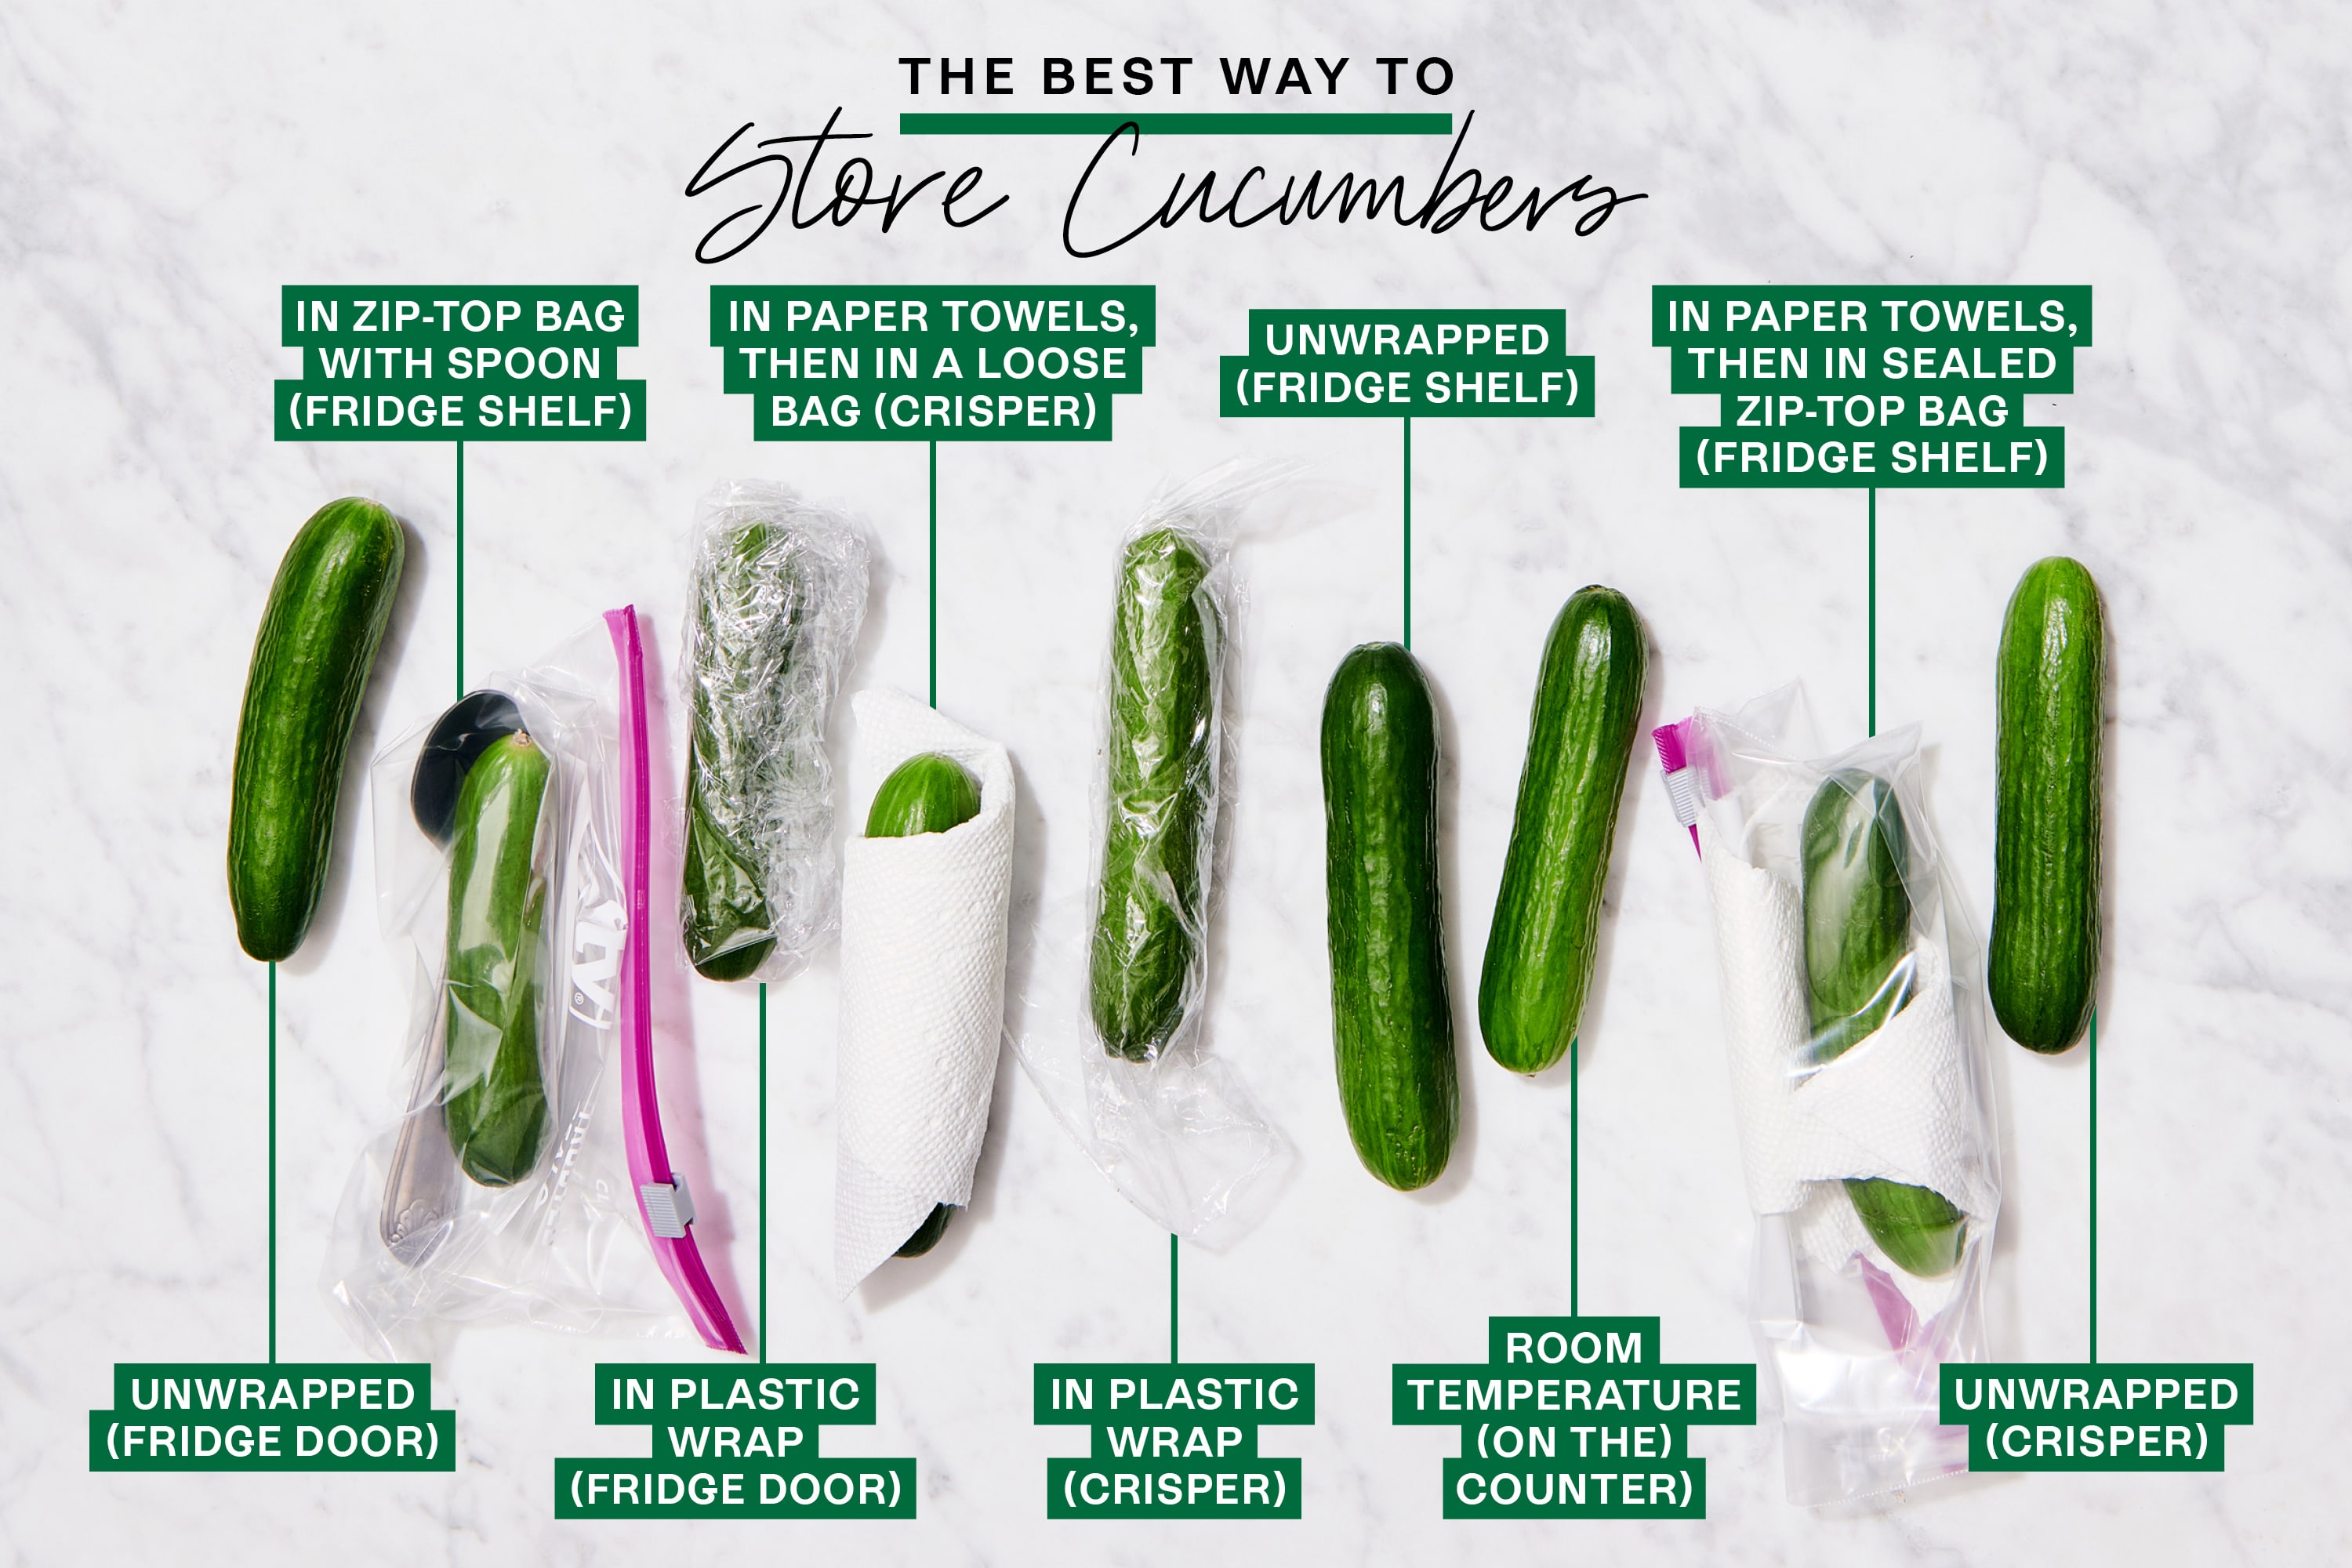 How to Buy English Cucumbers 